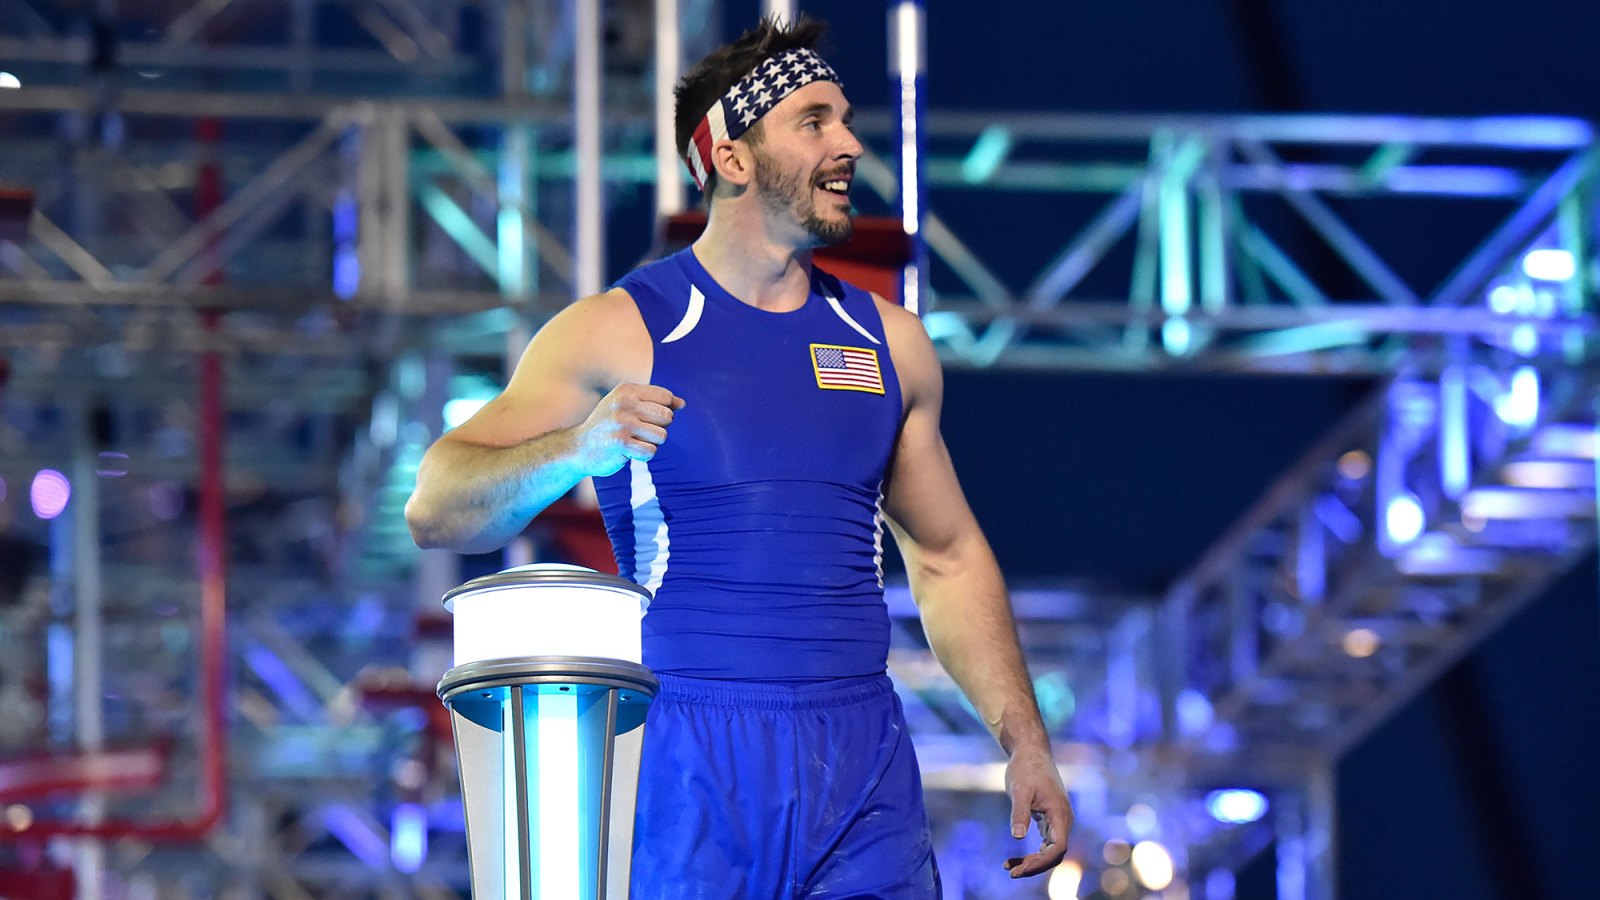 Drew Drechsel American Ninja Warrior Charged With Child Sex Crimes